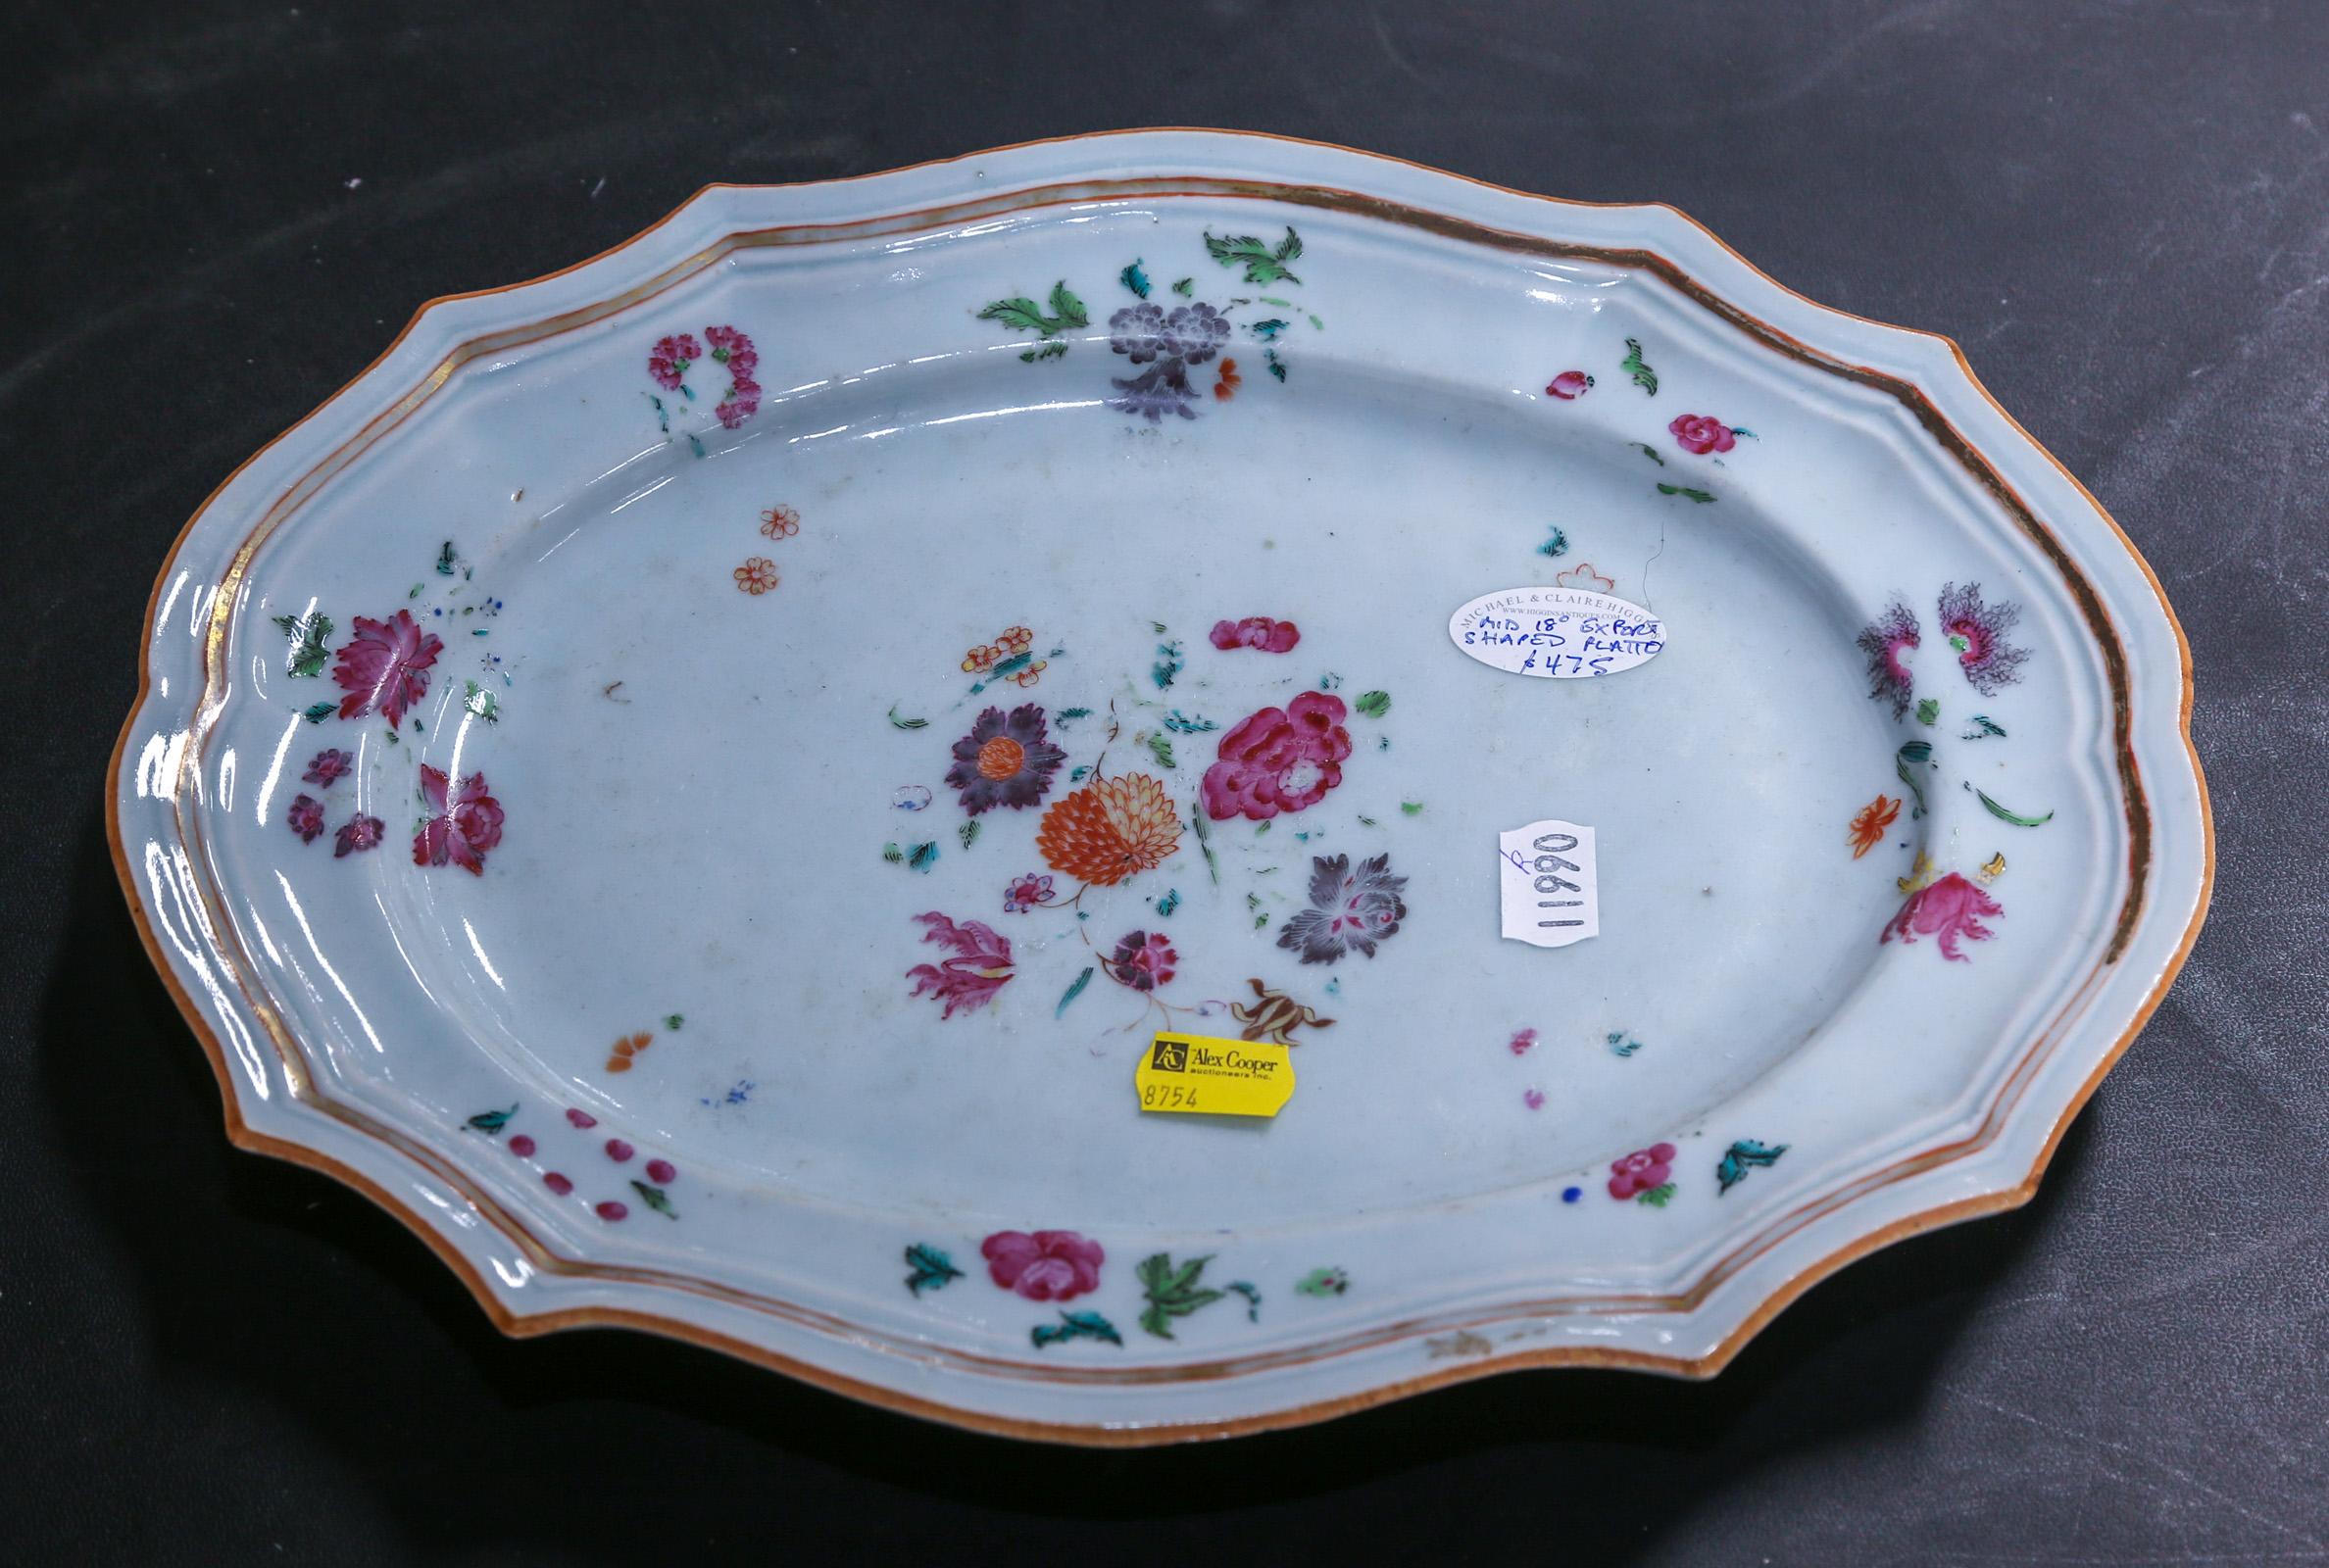 CHINESE EXPORT WARE SHAPED PLATTER